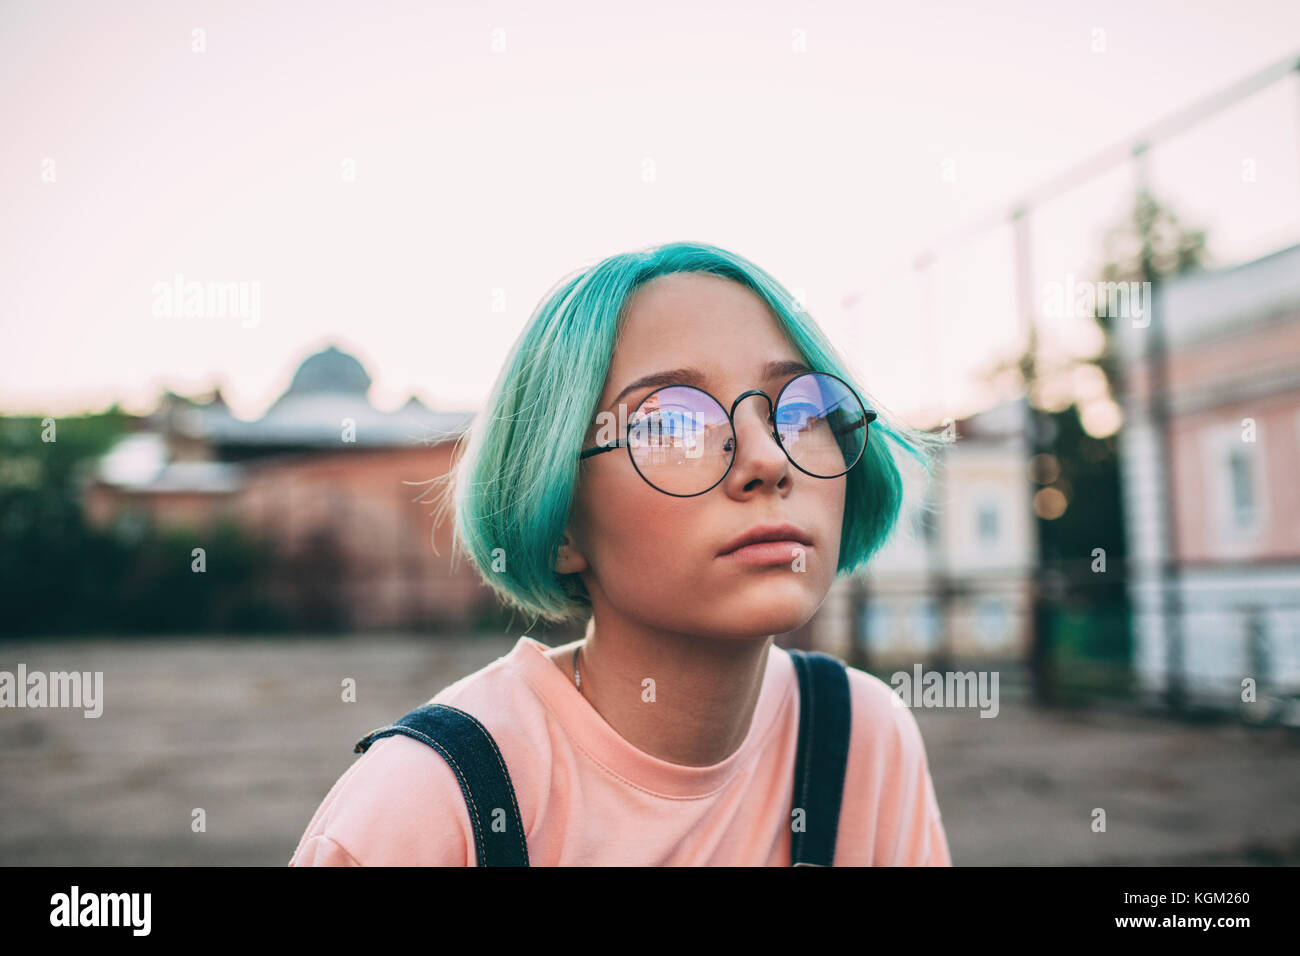 Portrait of teenage girl with green dyed hair wearing eyeglasses Stock Photo